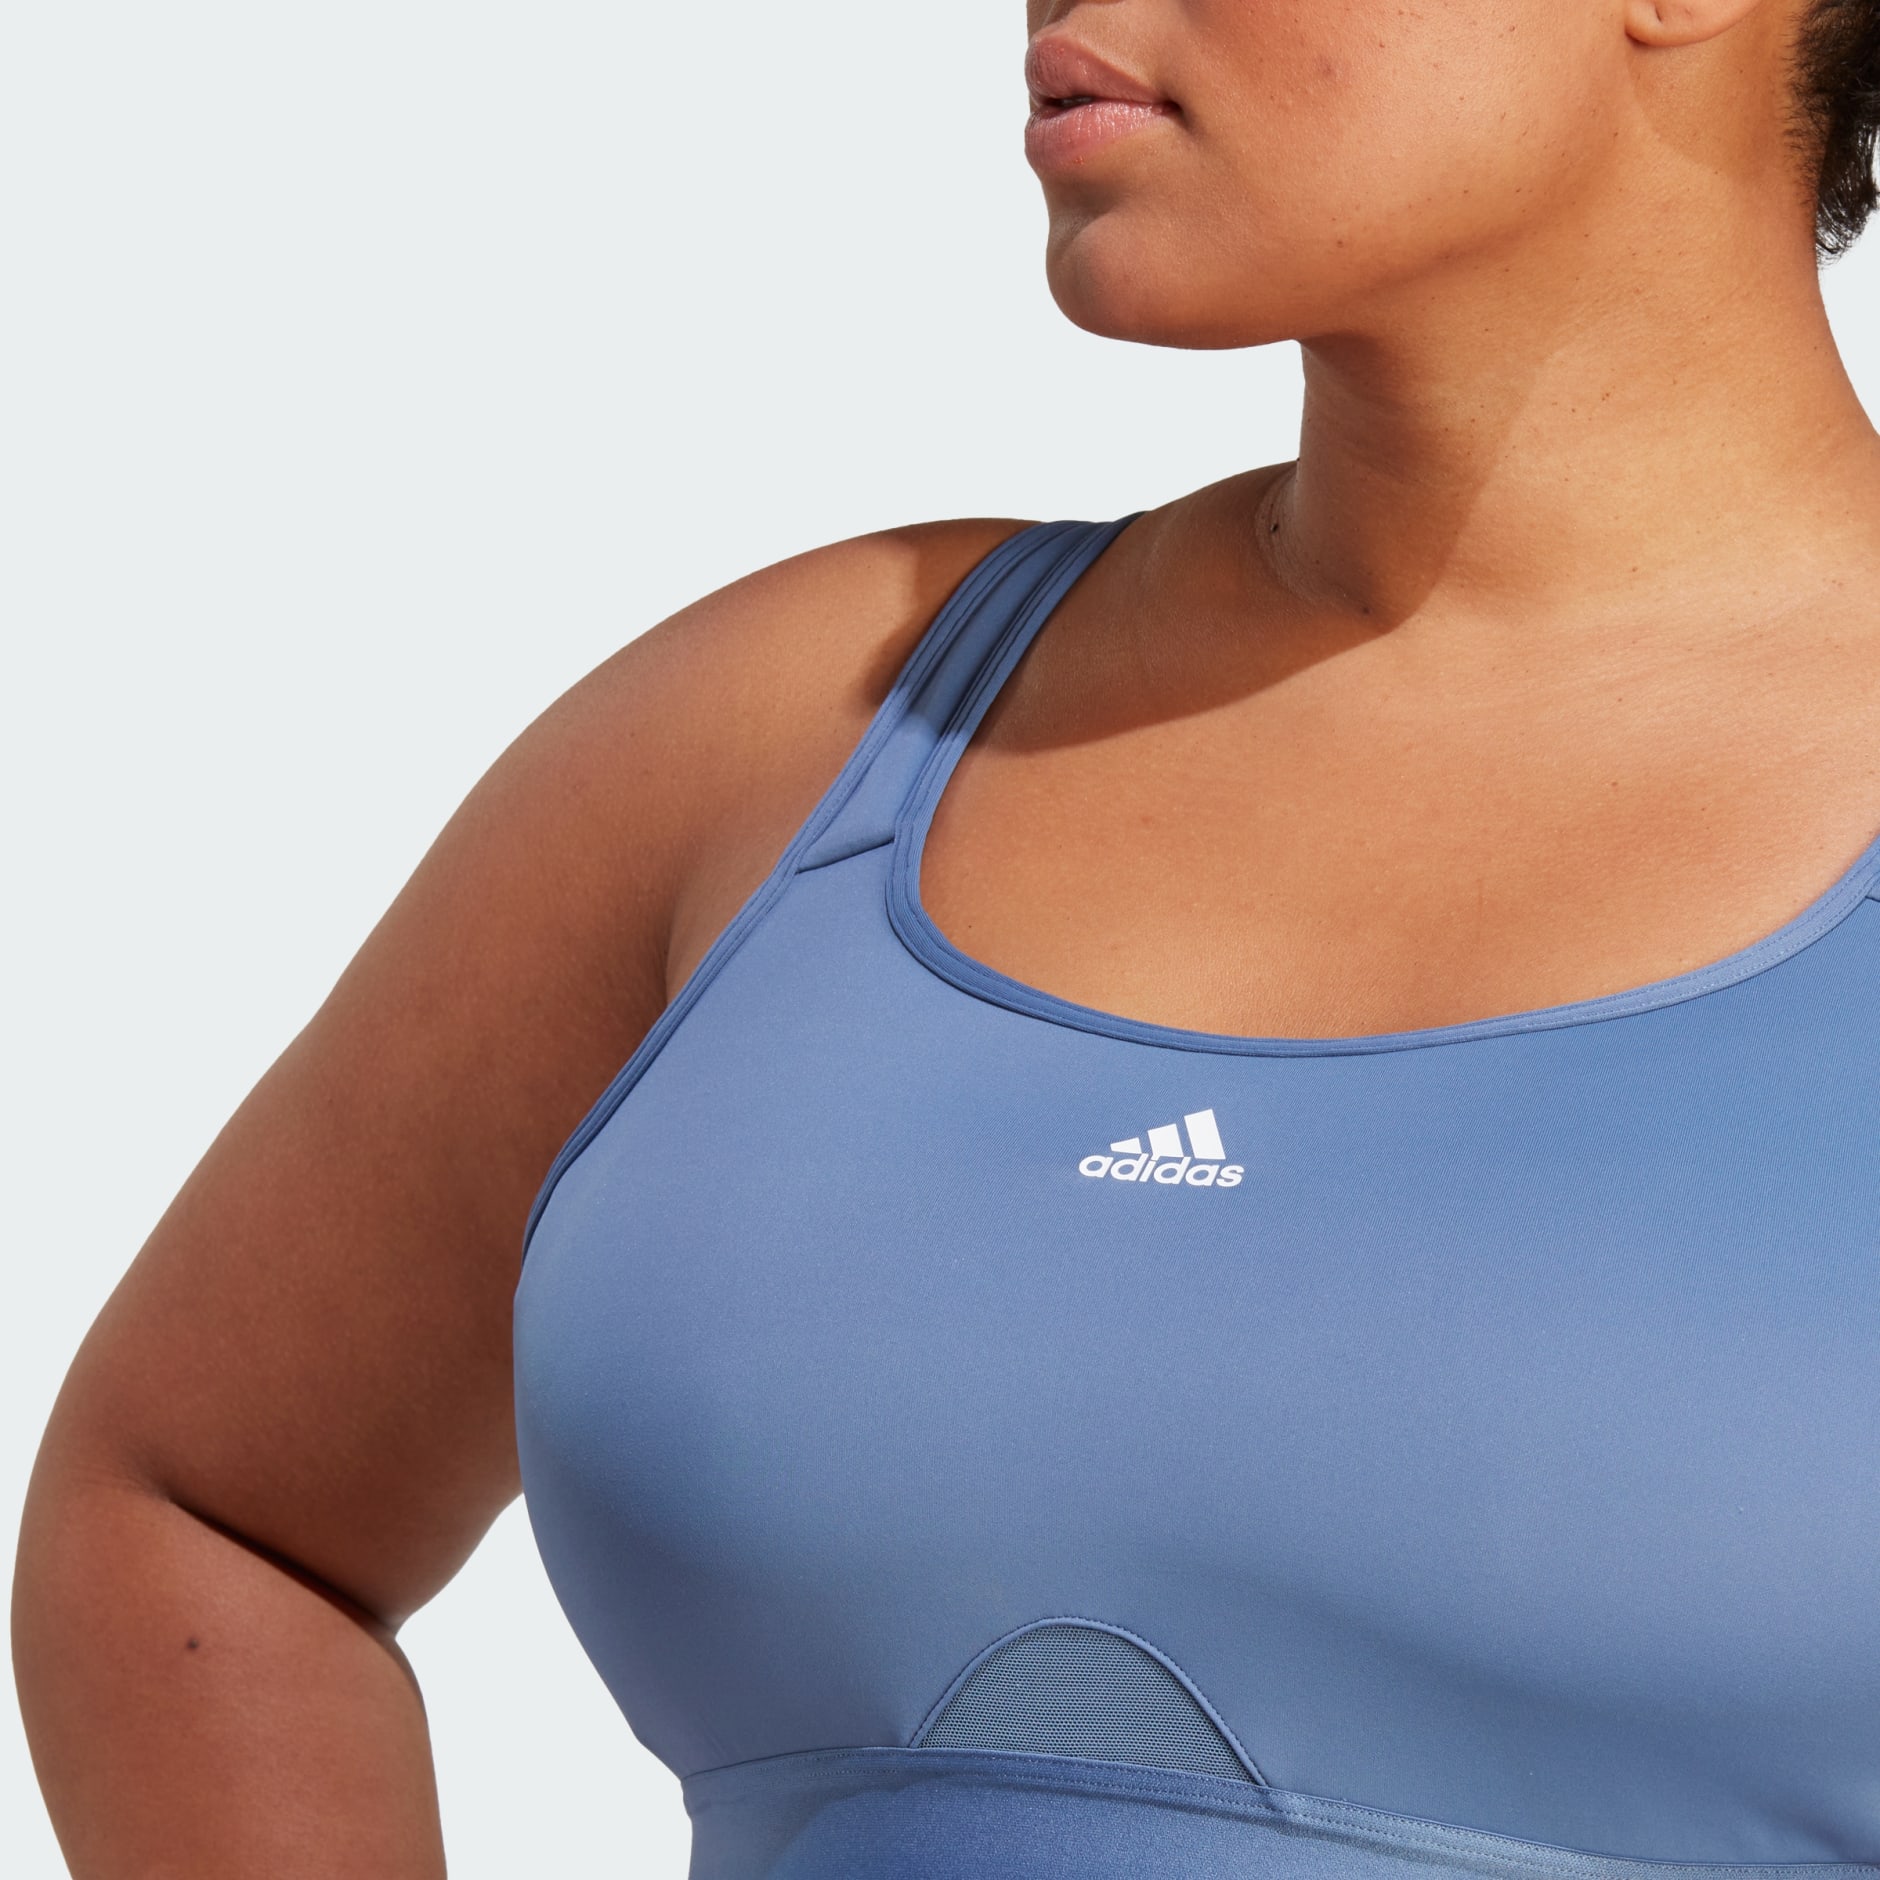 adidas Performance ADIDAS TLRD MOVE HIGH-SUPPORT PLUS SIZE